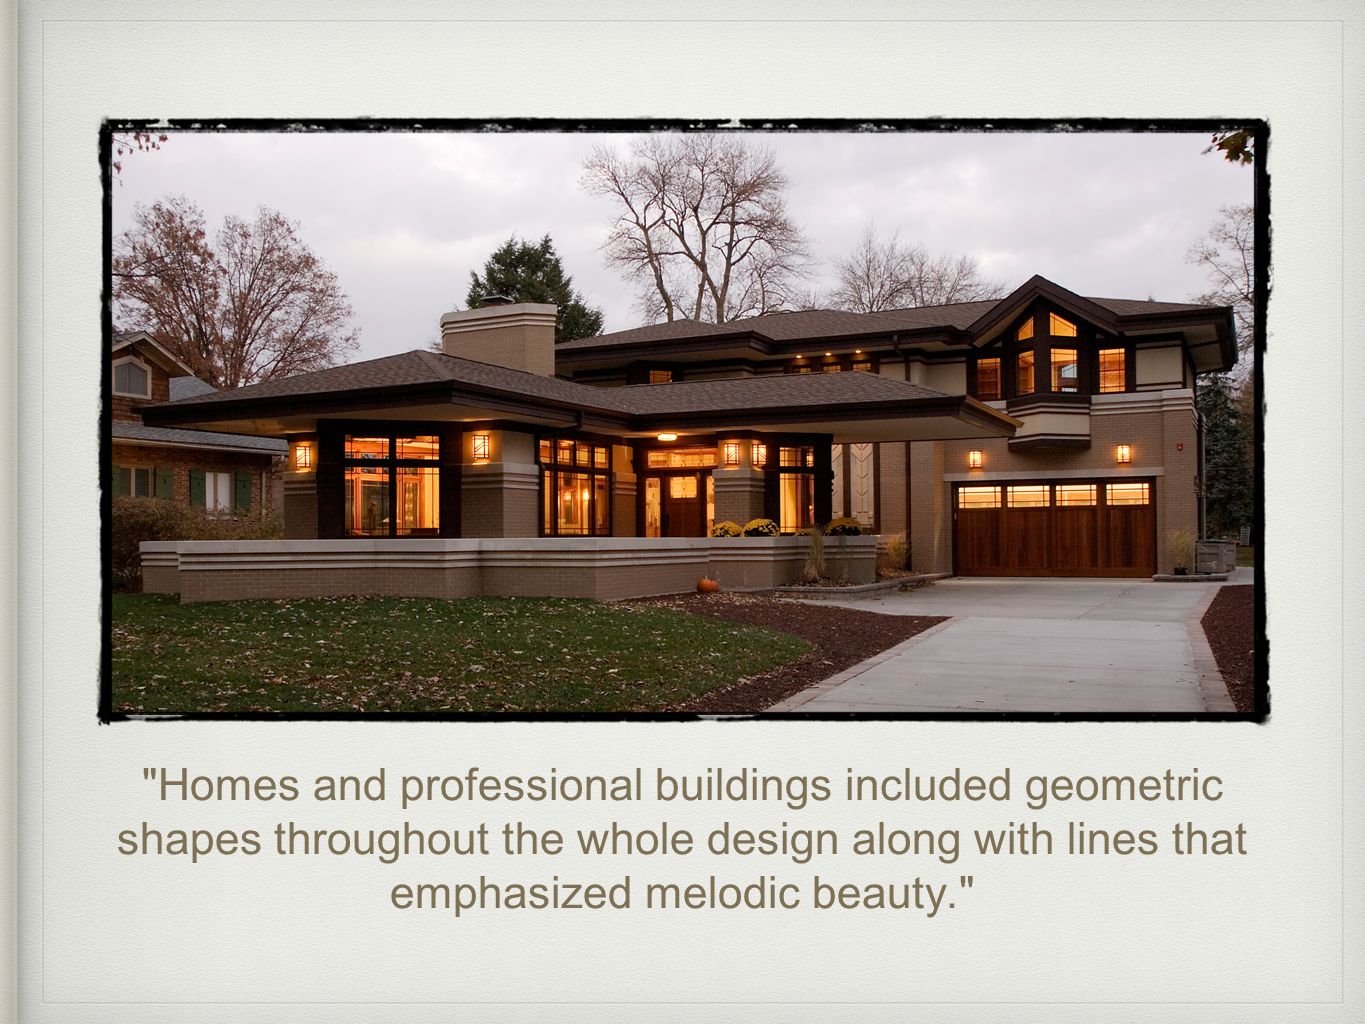 Homes and professional buildings included geometric shapes throughout the whole design along with lines that emphasized melodic beauty.